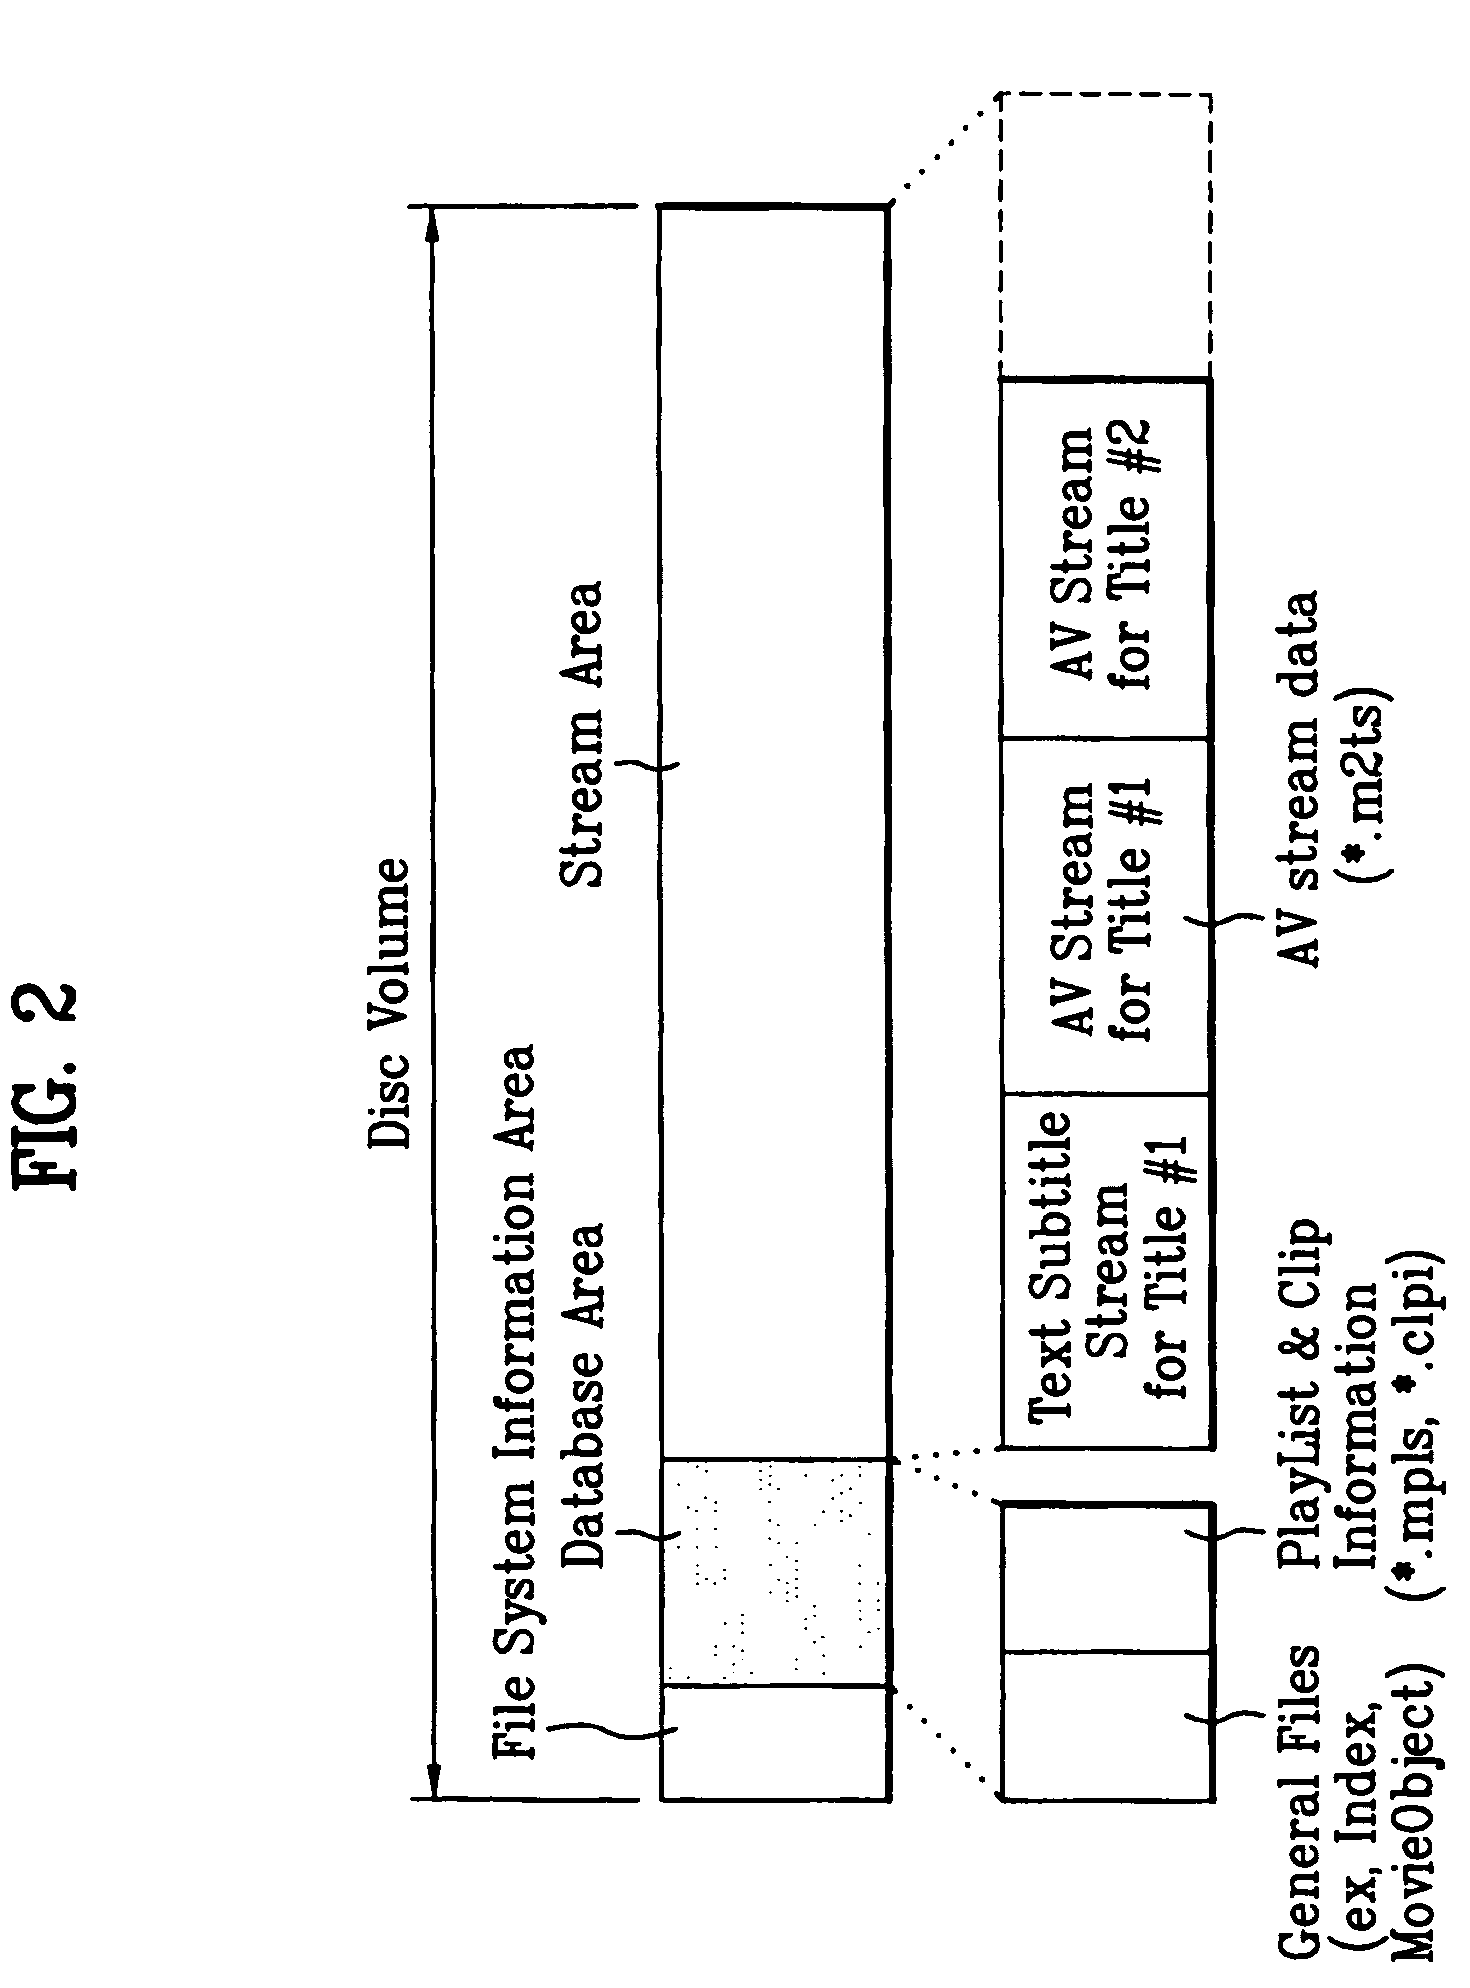 Recording medium and method and apparatus for reproducing and recording text subtitle streams